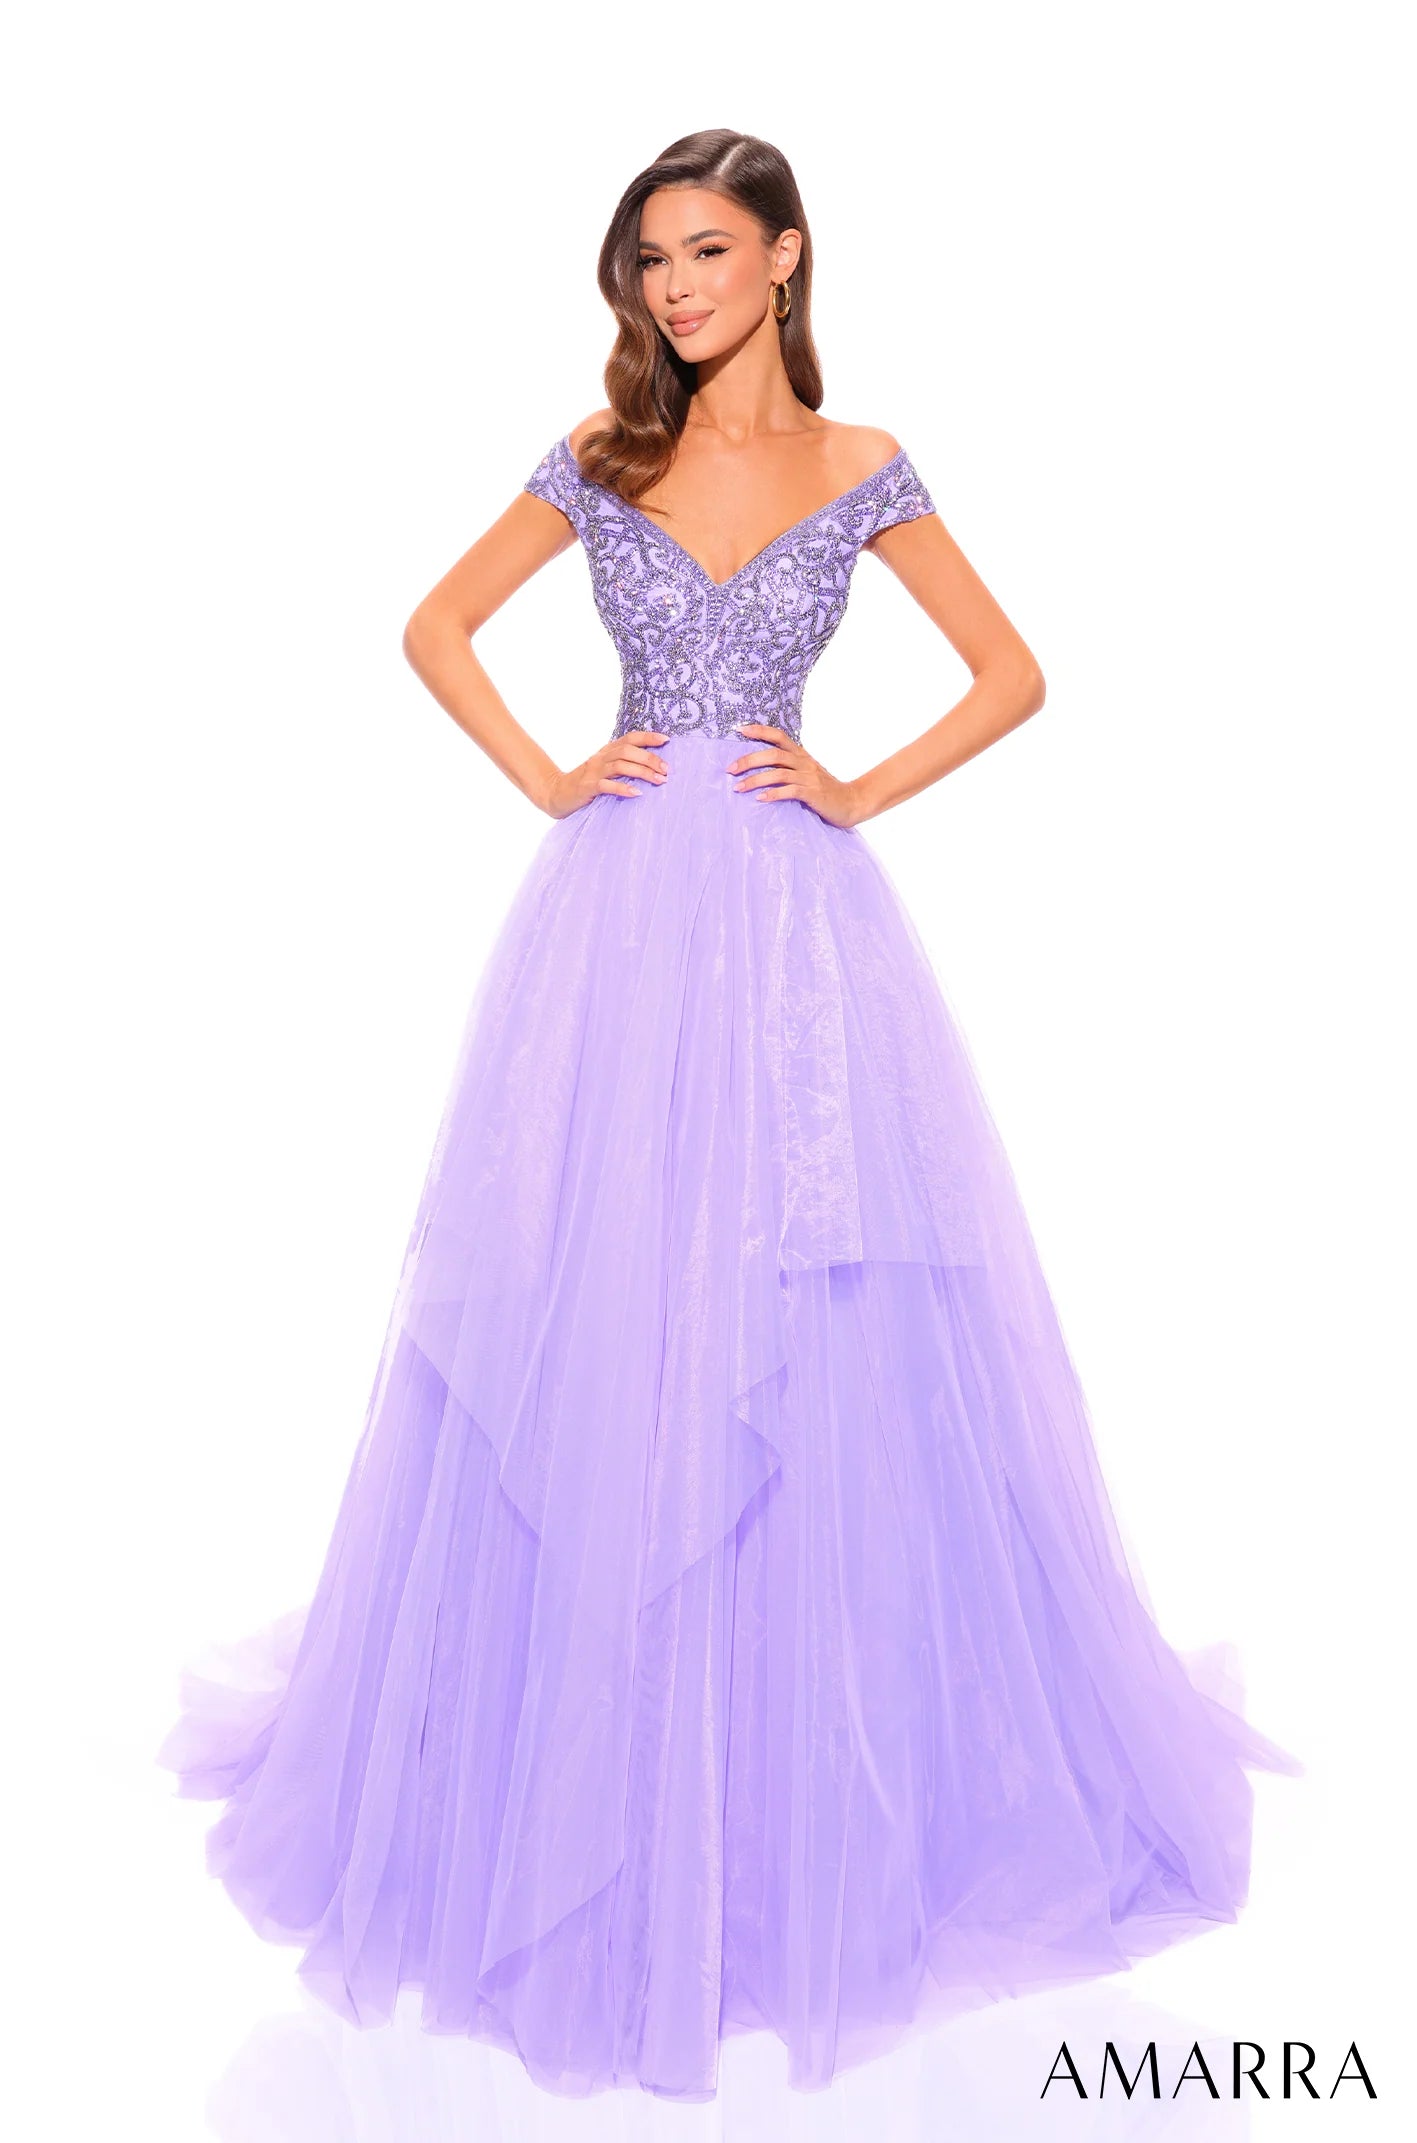 This dazzling prom dress radiates charm, romance and magic - all ingredients for a perfect prom night. The bodice is magnificently designed with labyrinthine rhinestone detail, highlighted by the off-the-shoulder sleeve and flirtatious sweetheart neckline that will capture the attention of anyone that beholds you. However, that is not the main piece of this gorgeous attire. 